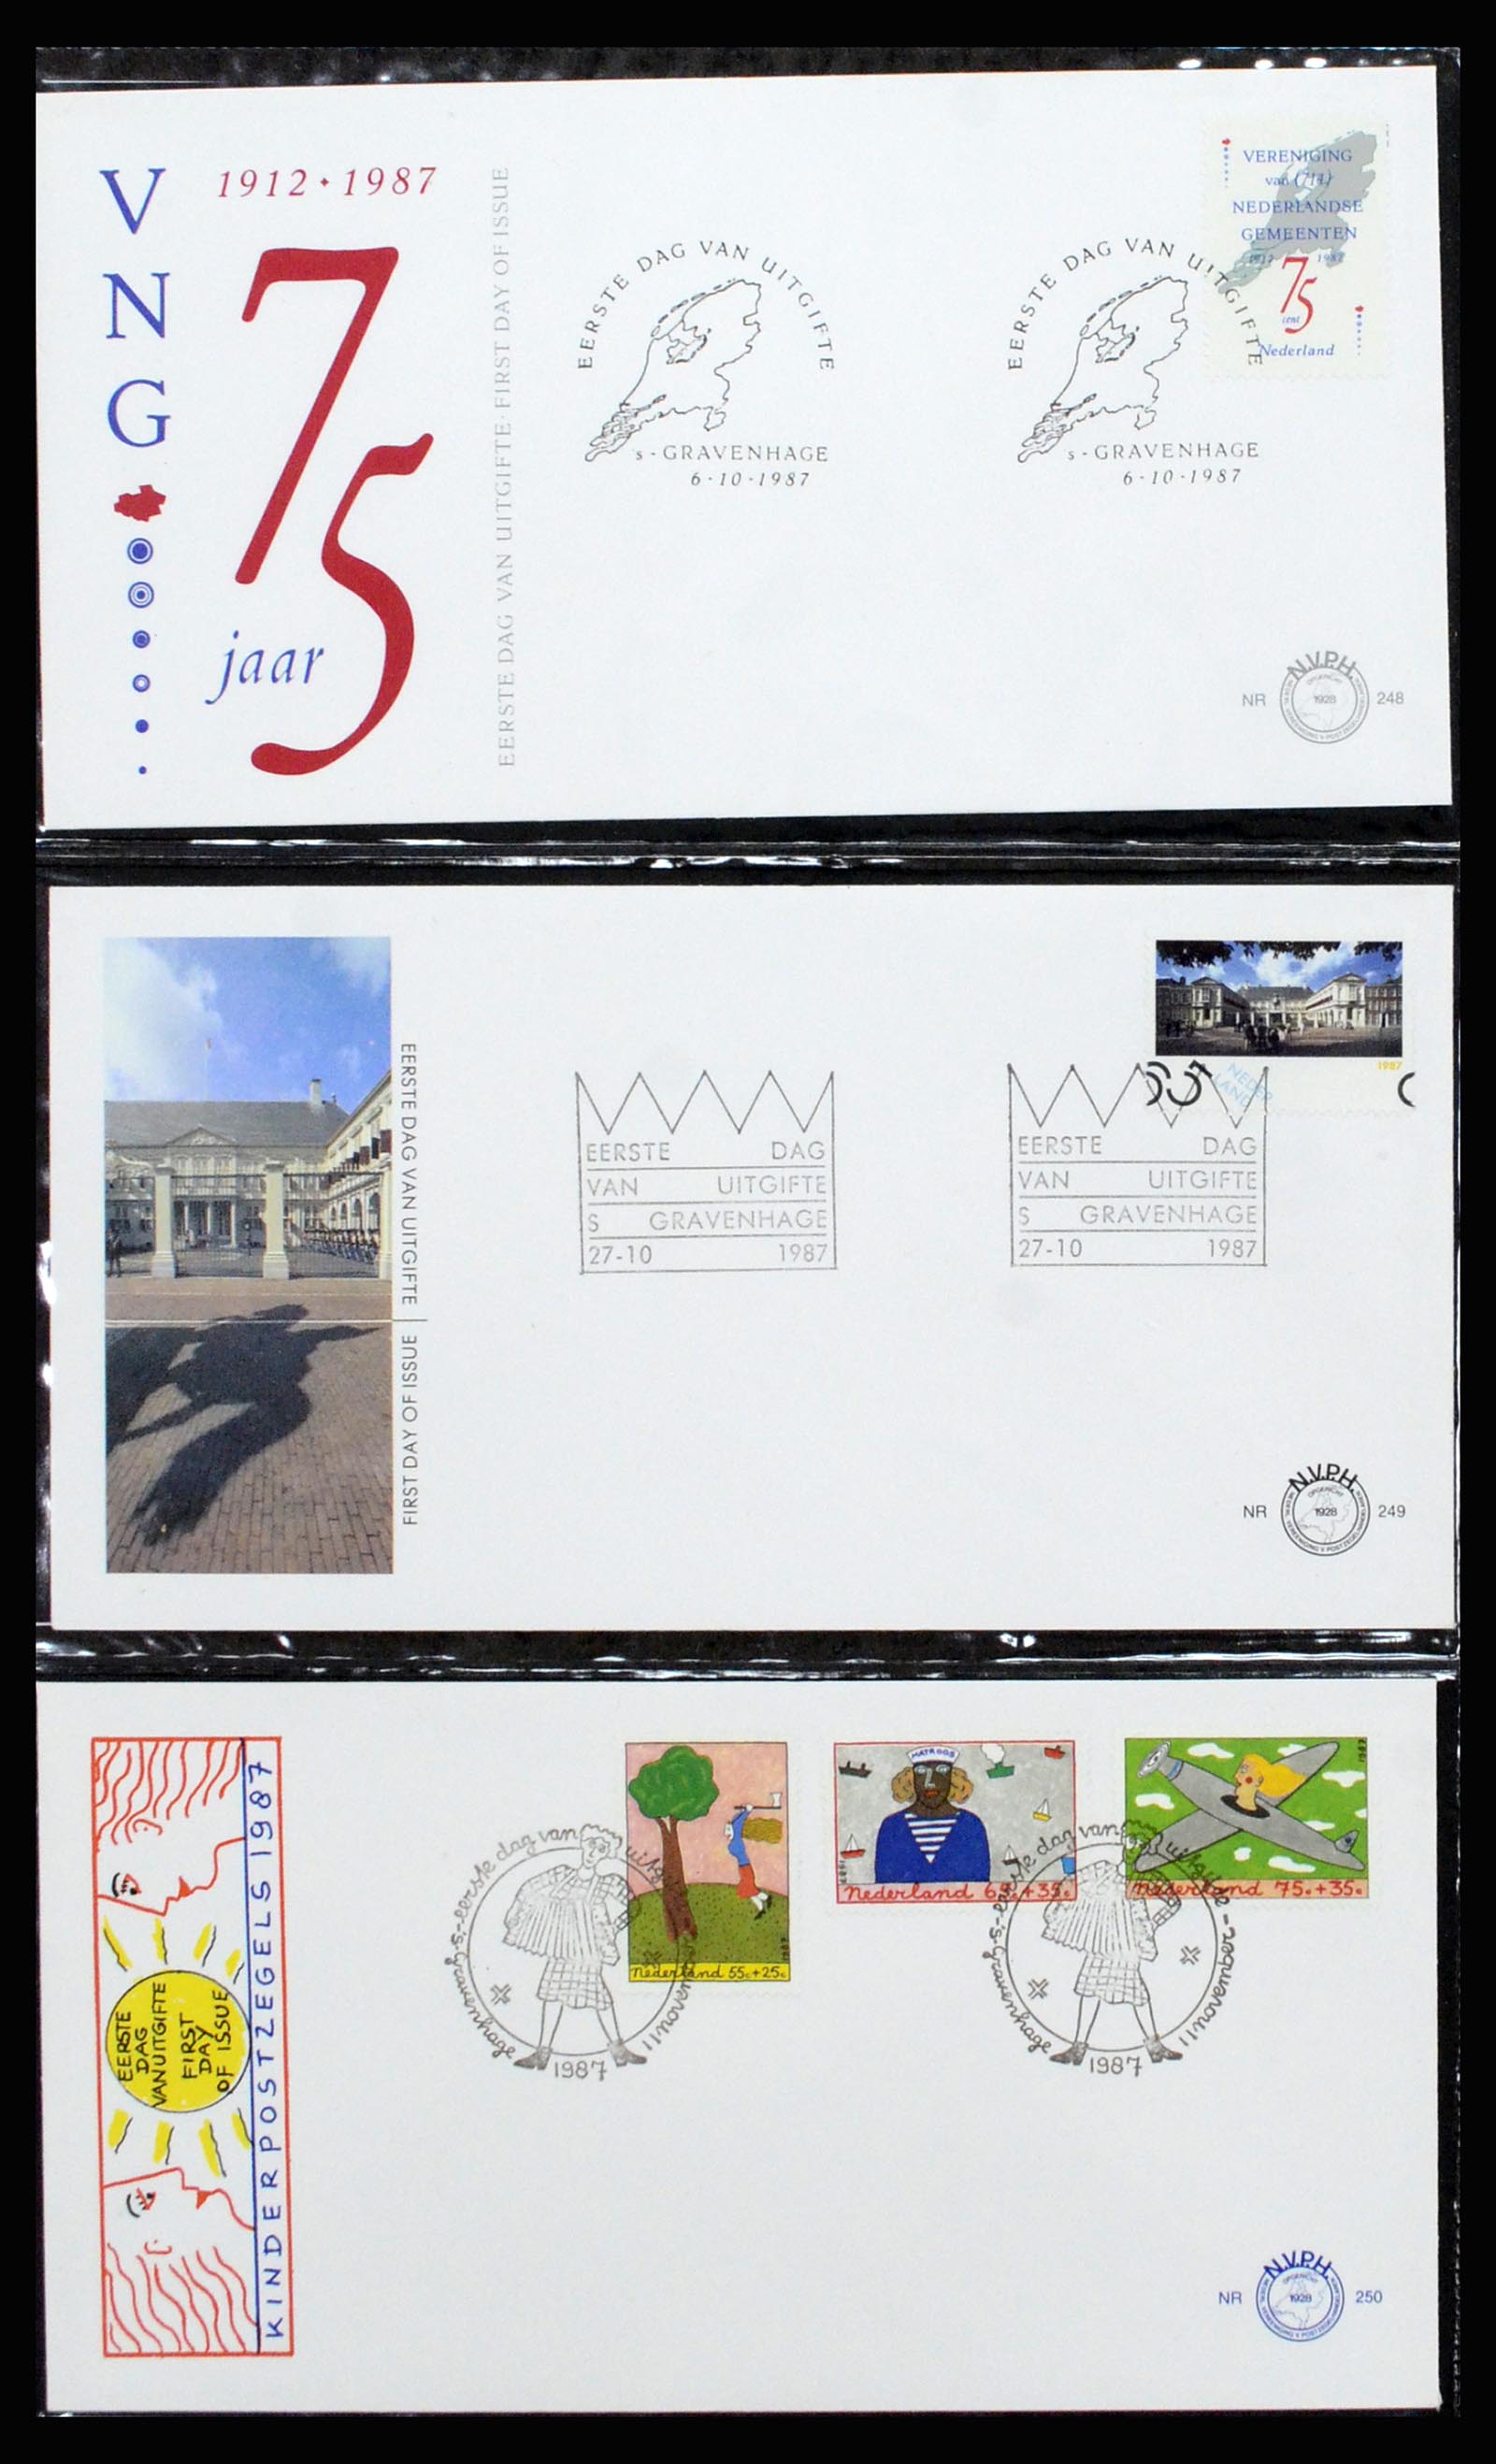 37197 094 - Stamp collection 37197 Netherlands FDC's 1950-2004.